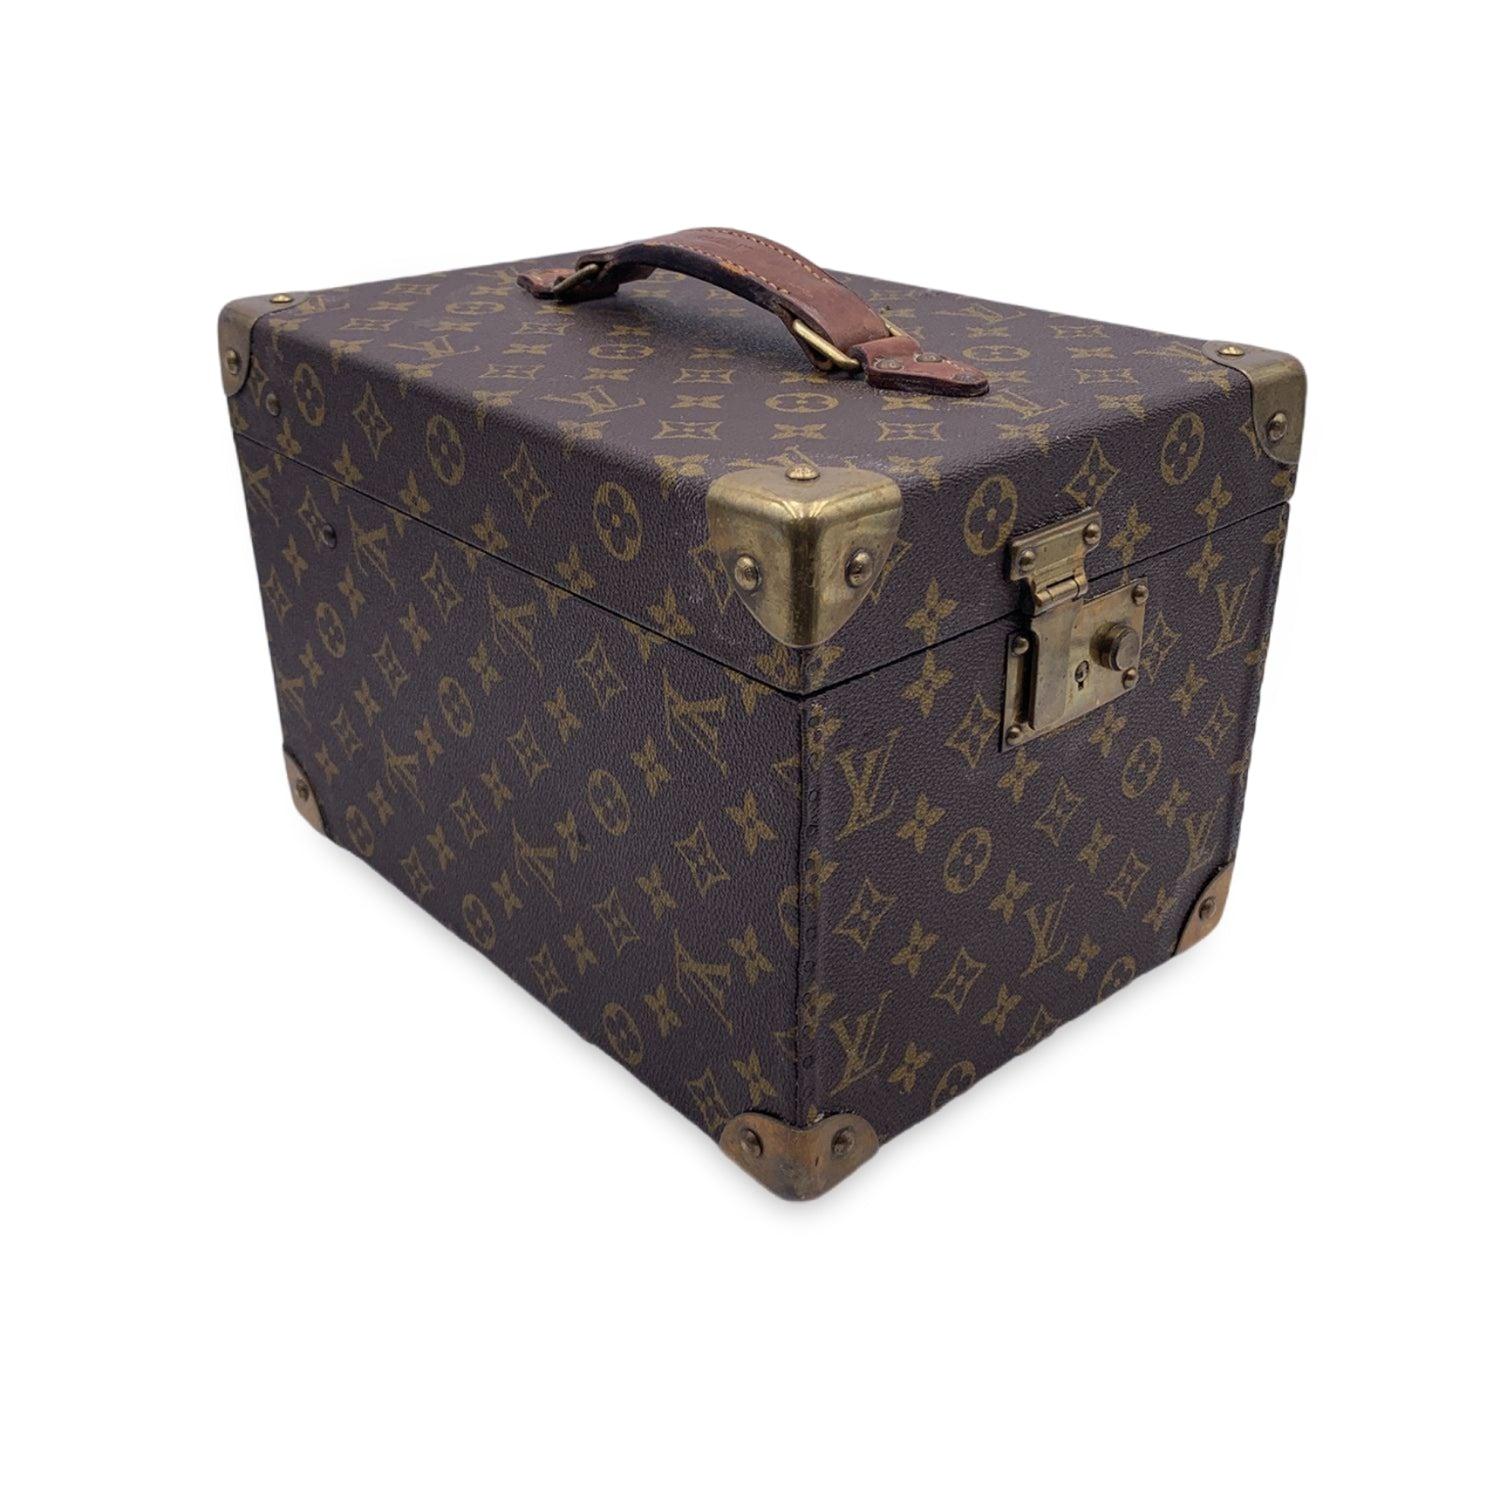 This beautiful Bag will come with a Certificate of Authenticity provided by Entrupy. The certificate will be provided at no further cost. Splendid Louis Vuitton monogram 'Boite Flacons' cosmetic travel trunk/case, mod. M21828 . This is a limited